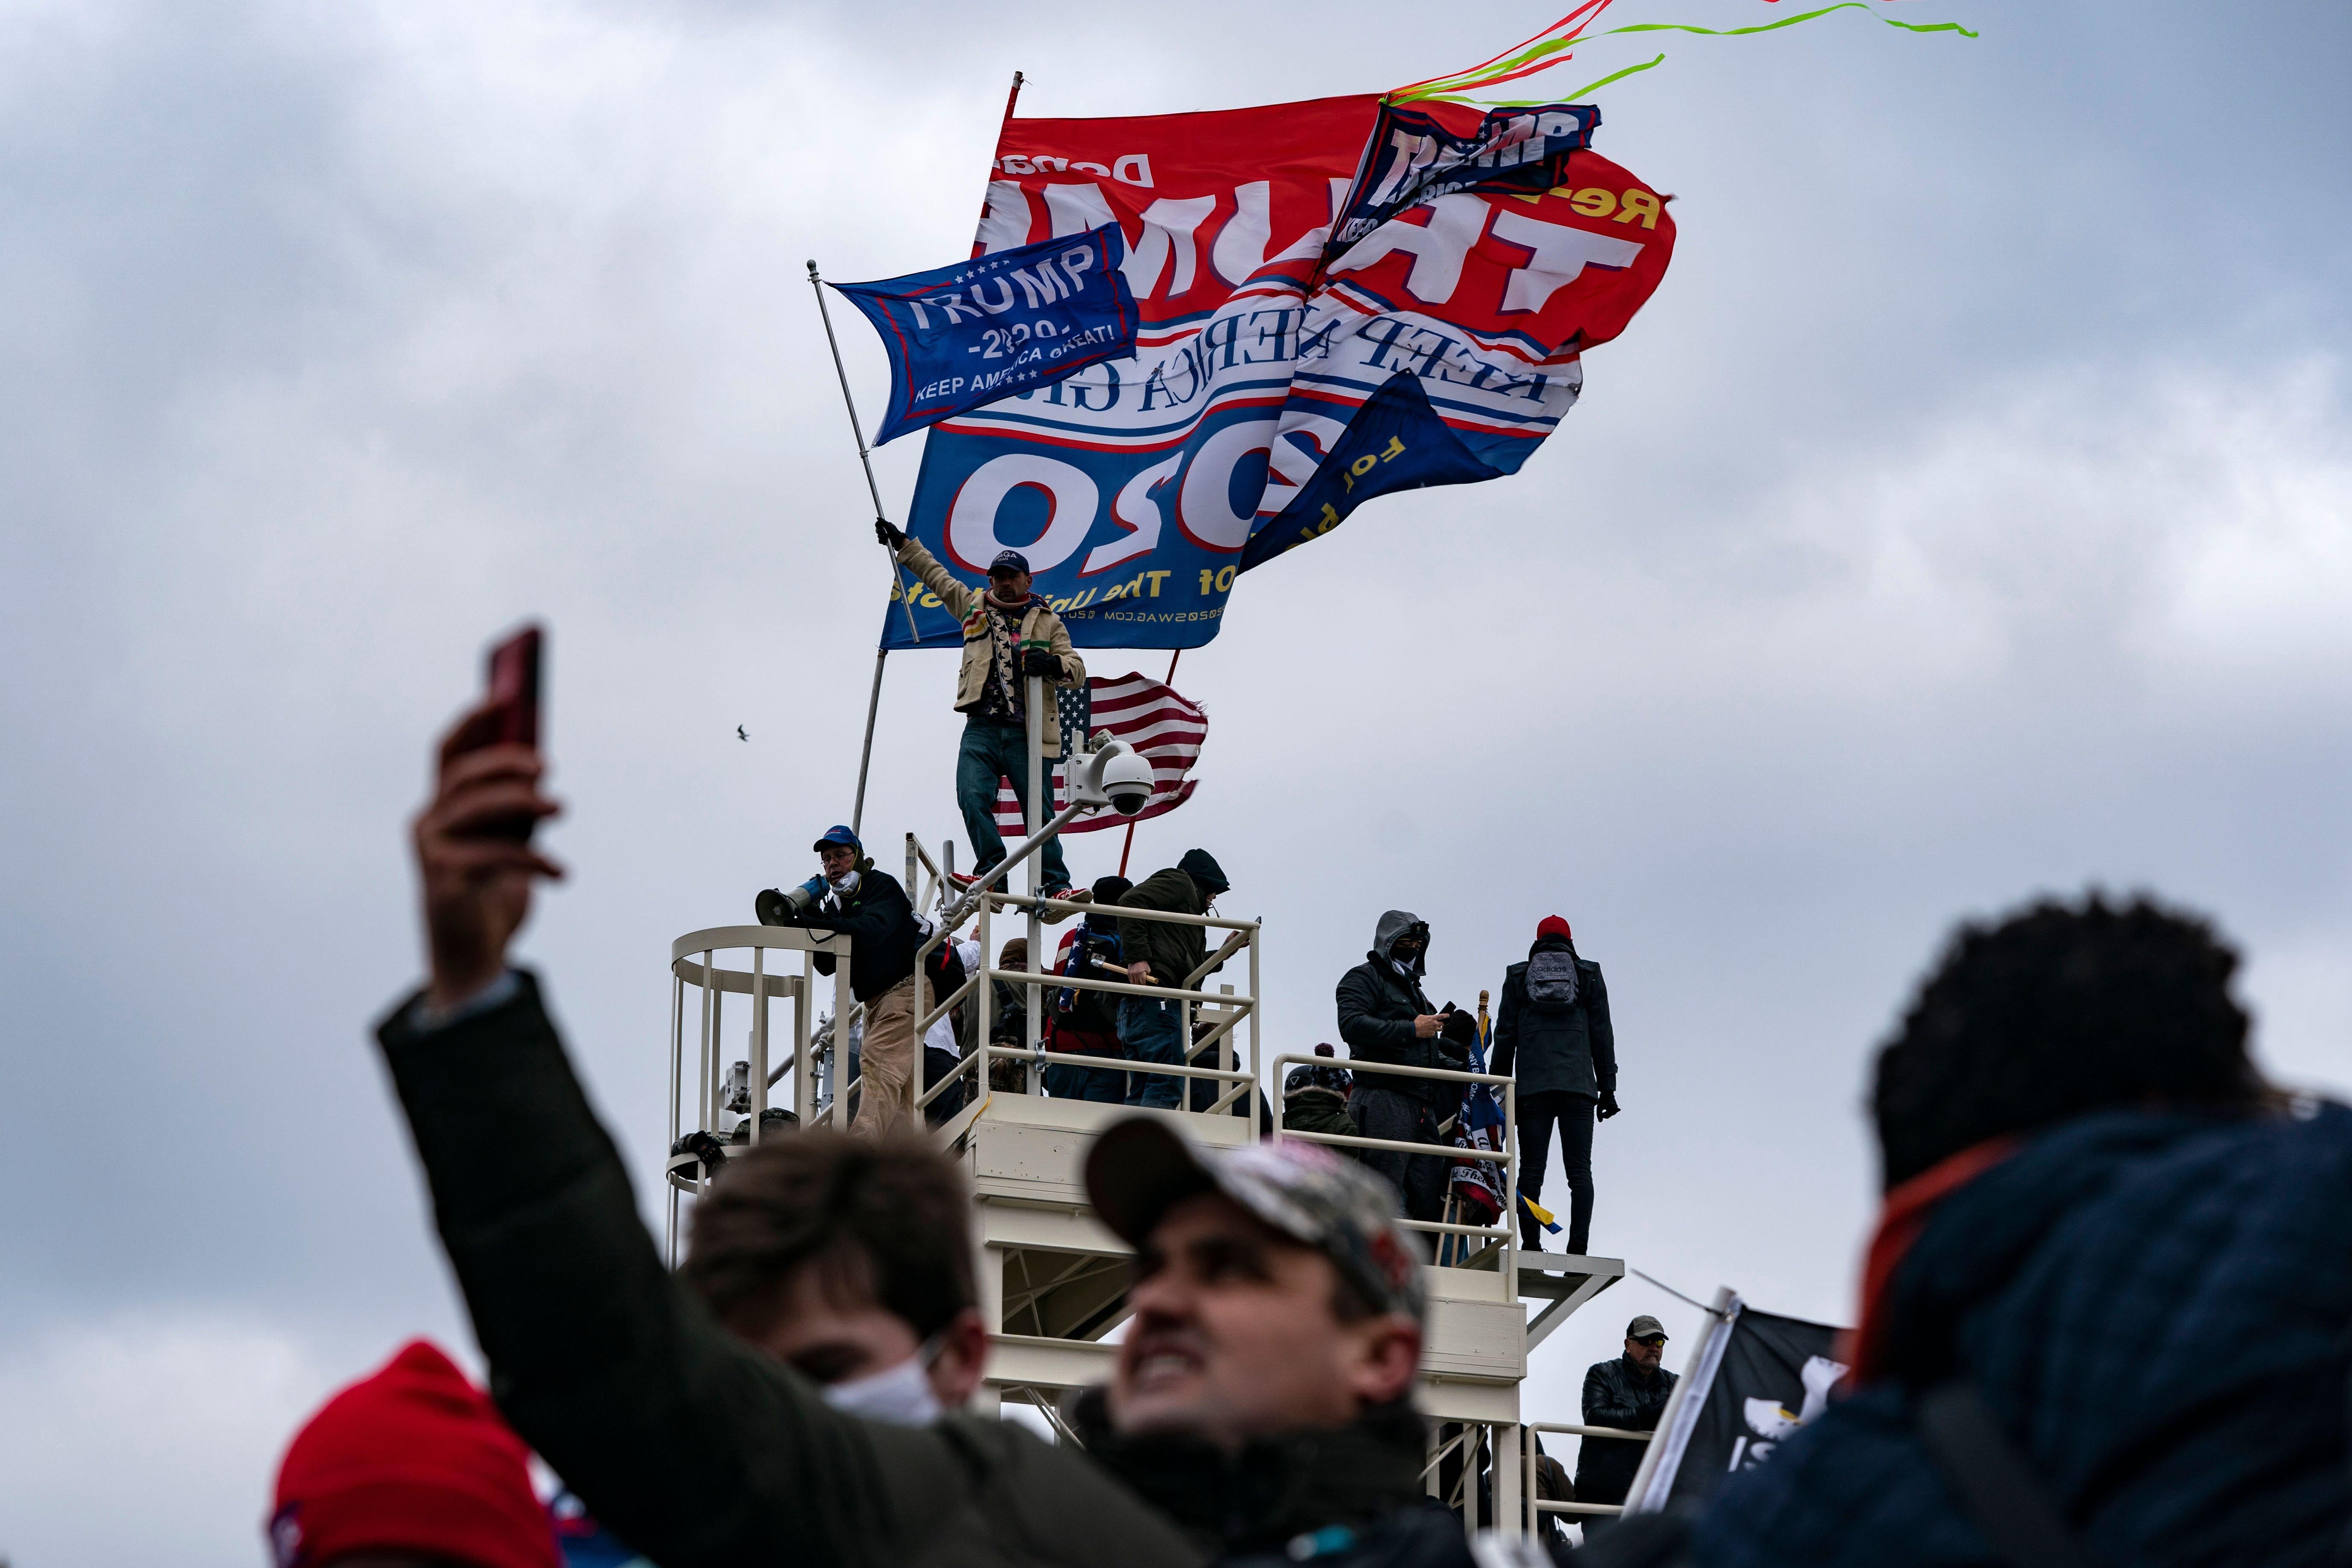 People waving Trump flags mass on top of a platform on a cloudy day. Below, a Trump supporter holds his phone up to take a photo of the chaos.